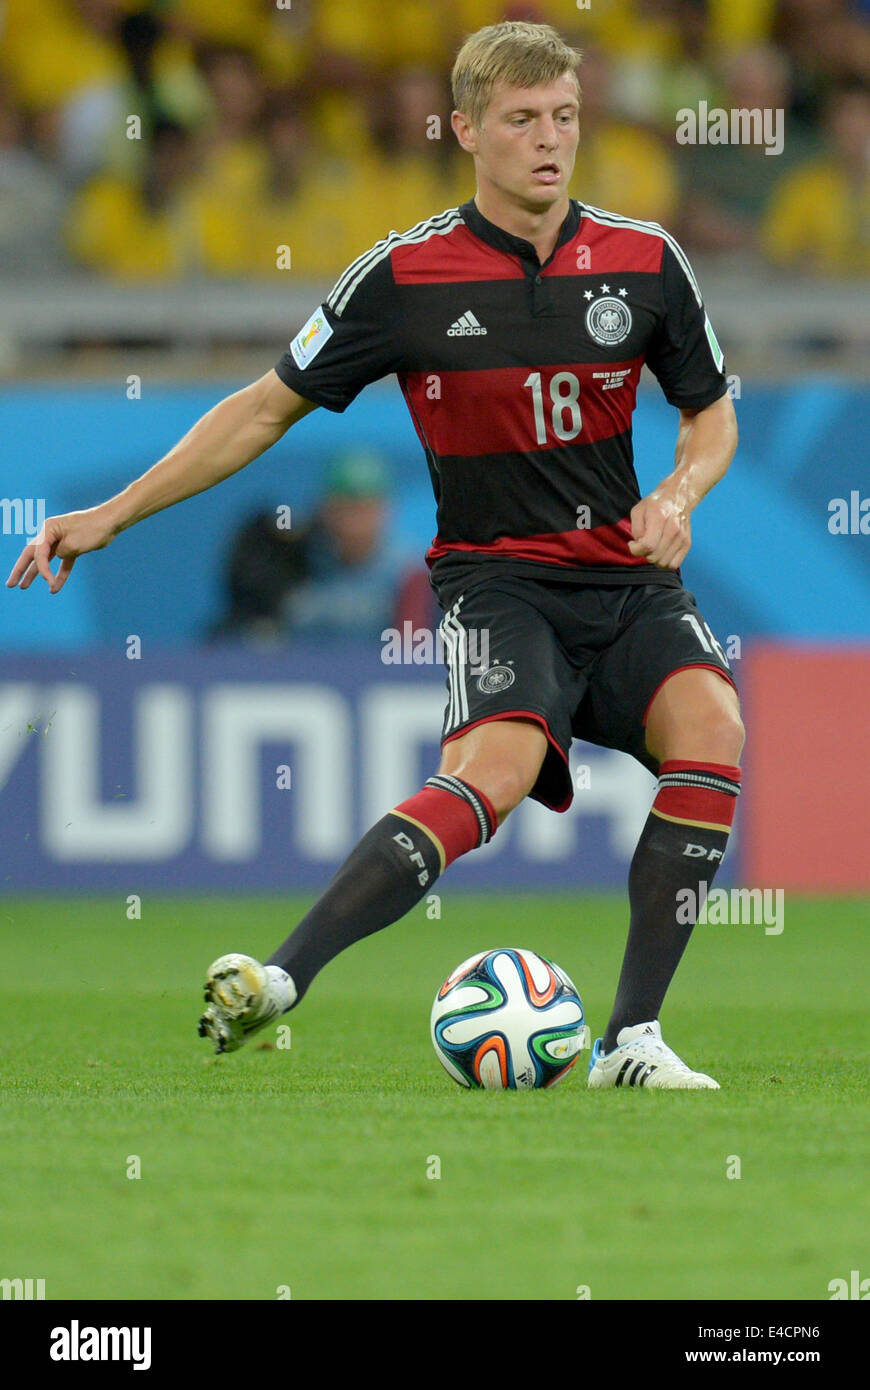 Belo Horizonte, Brazil. 08th July, 2014. Germany's Toni Kroos controls the ball during the FIFA World Cup 2014 semi-final soccer match between Brazil and Germany at Estadio Mineirao in Belo Horizonte, Brazil, 08 July 2014. Photo: Thomas Eisenhuth/dpa/Alamy Live News Stock Photo